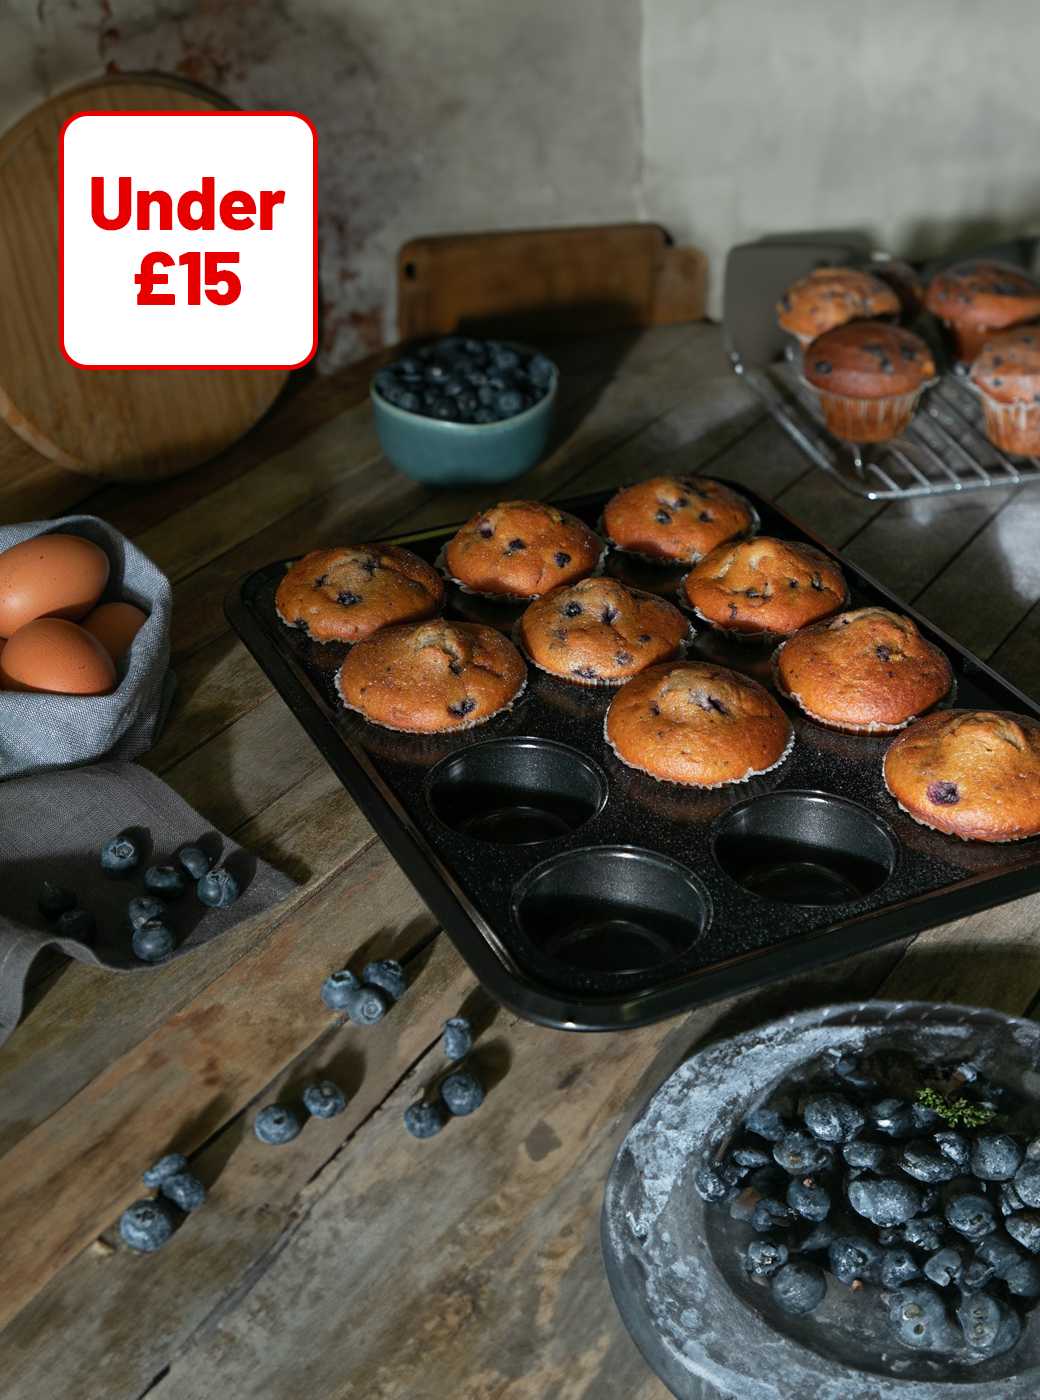 Bakeware under £15. Did someone say bake off?